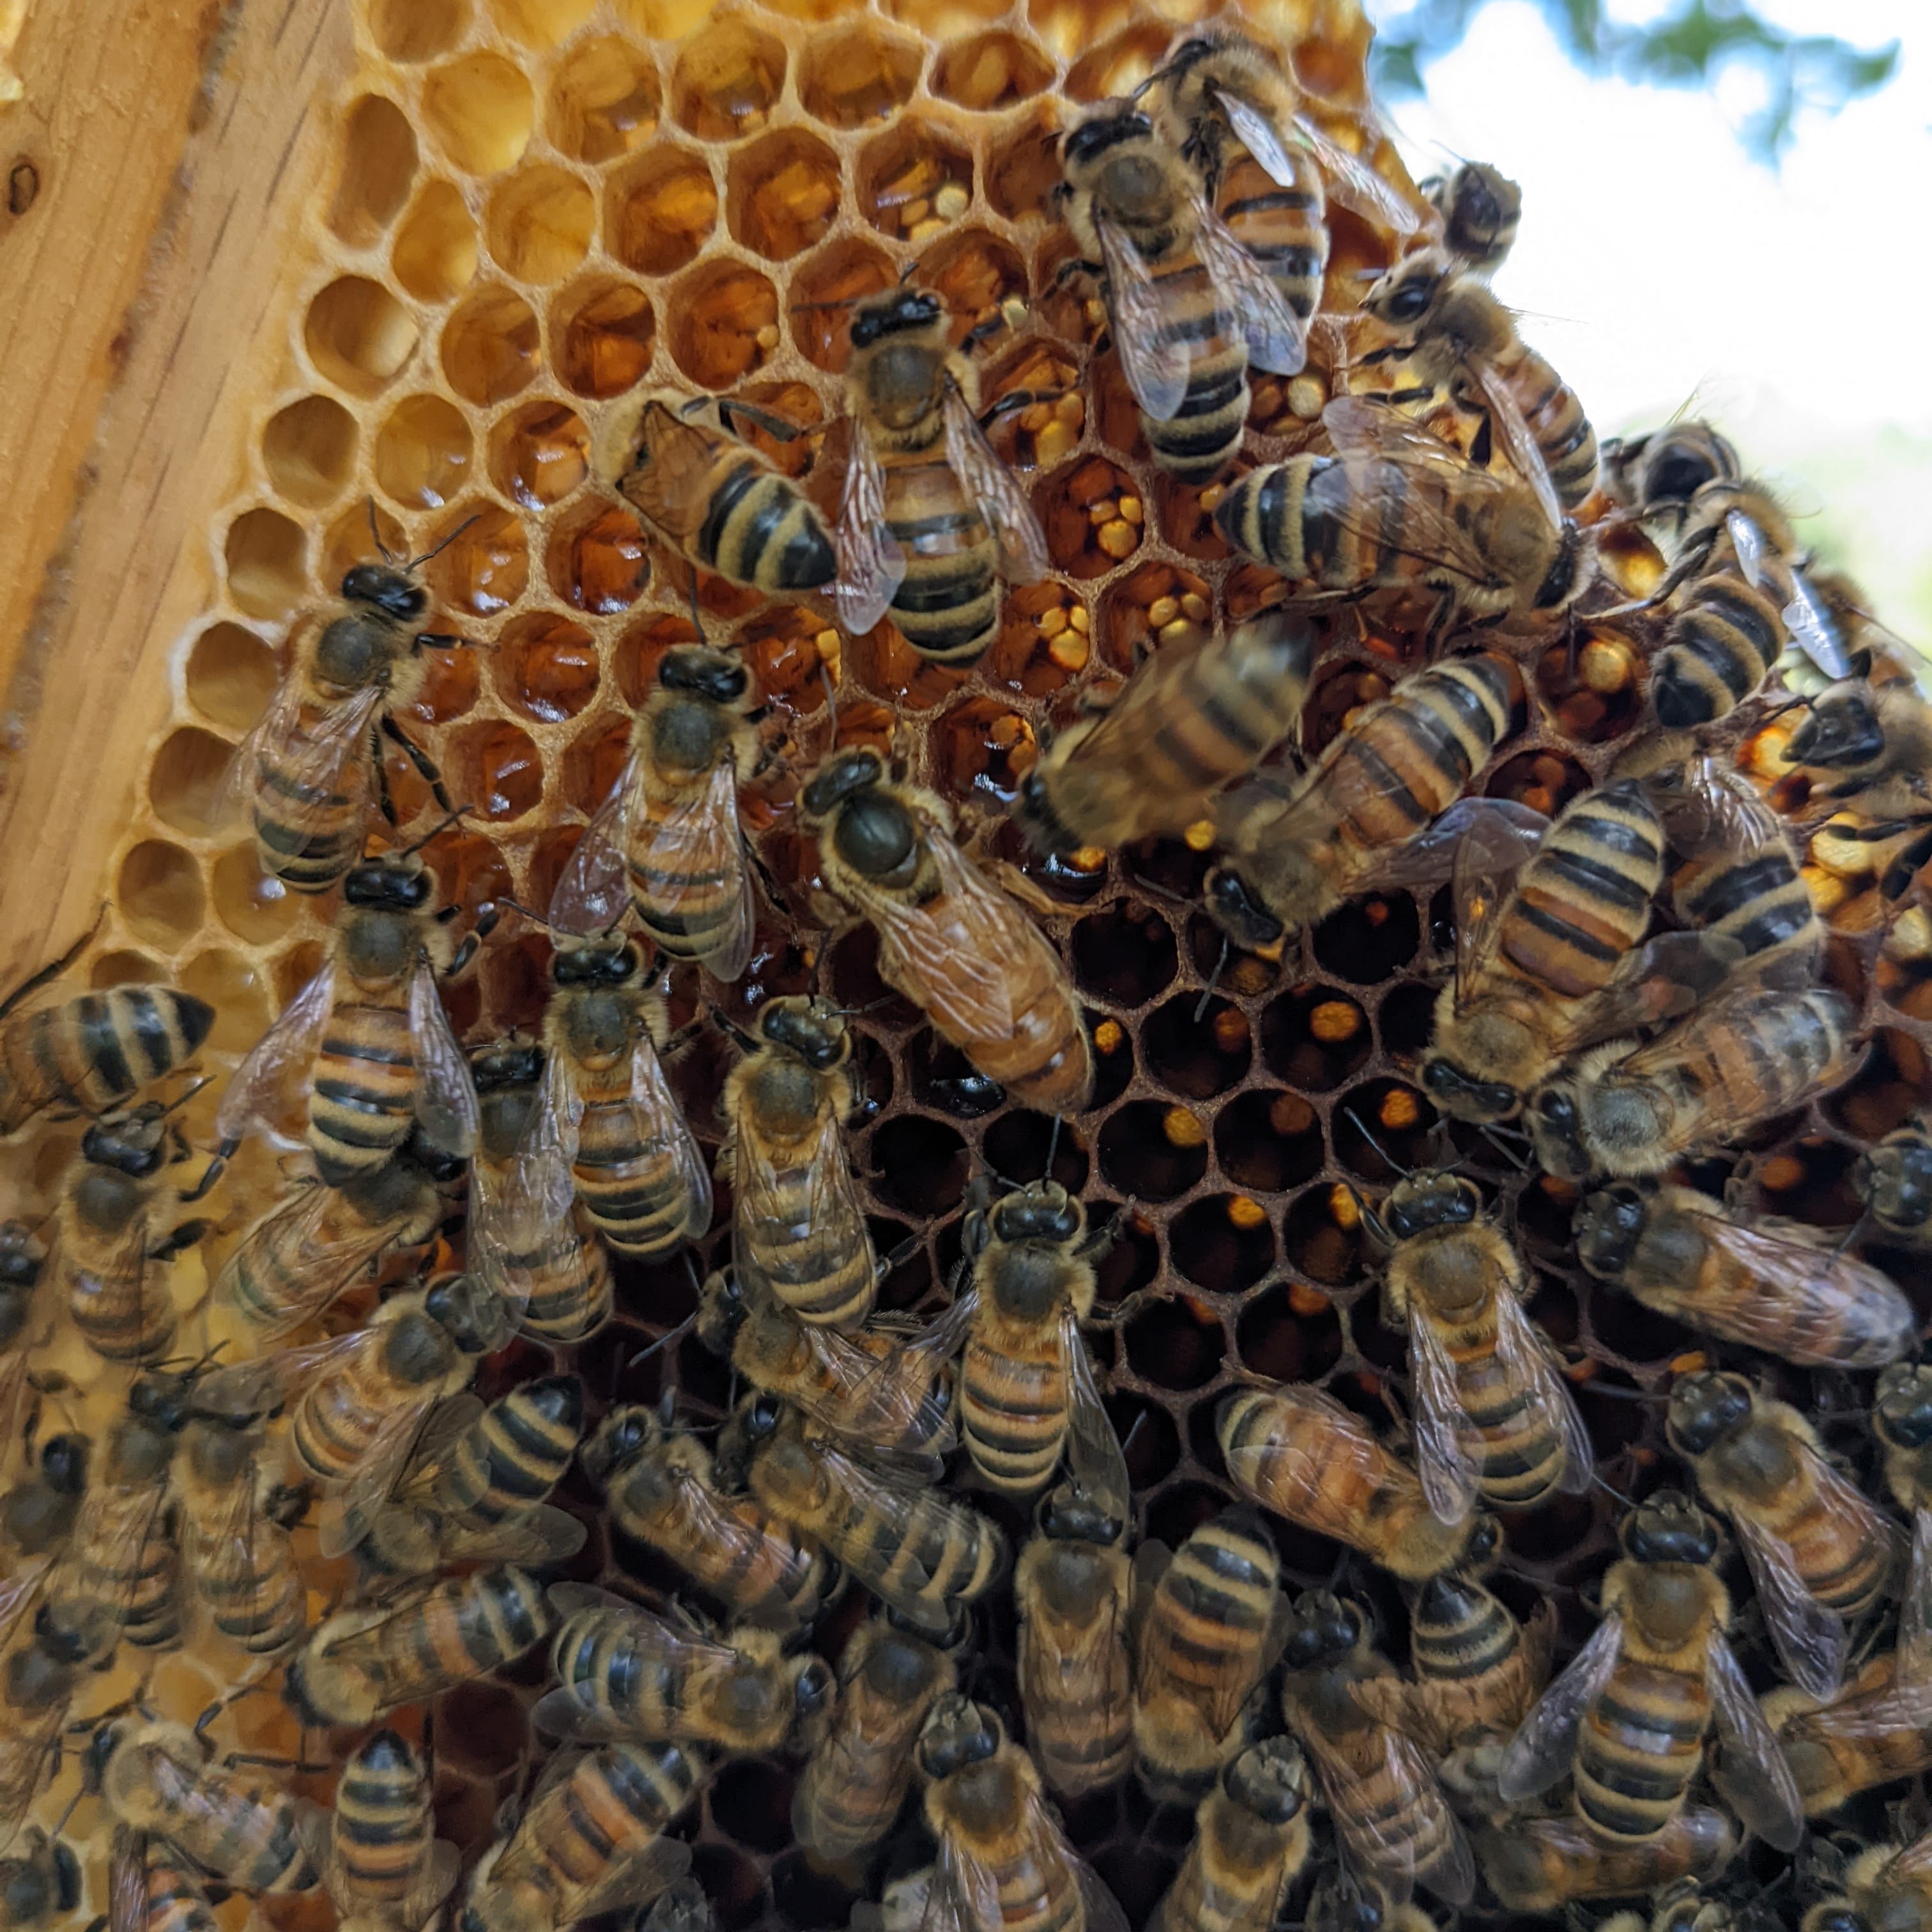 Honey bees on a comb, with a queen in the center.